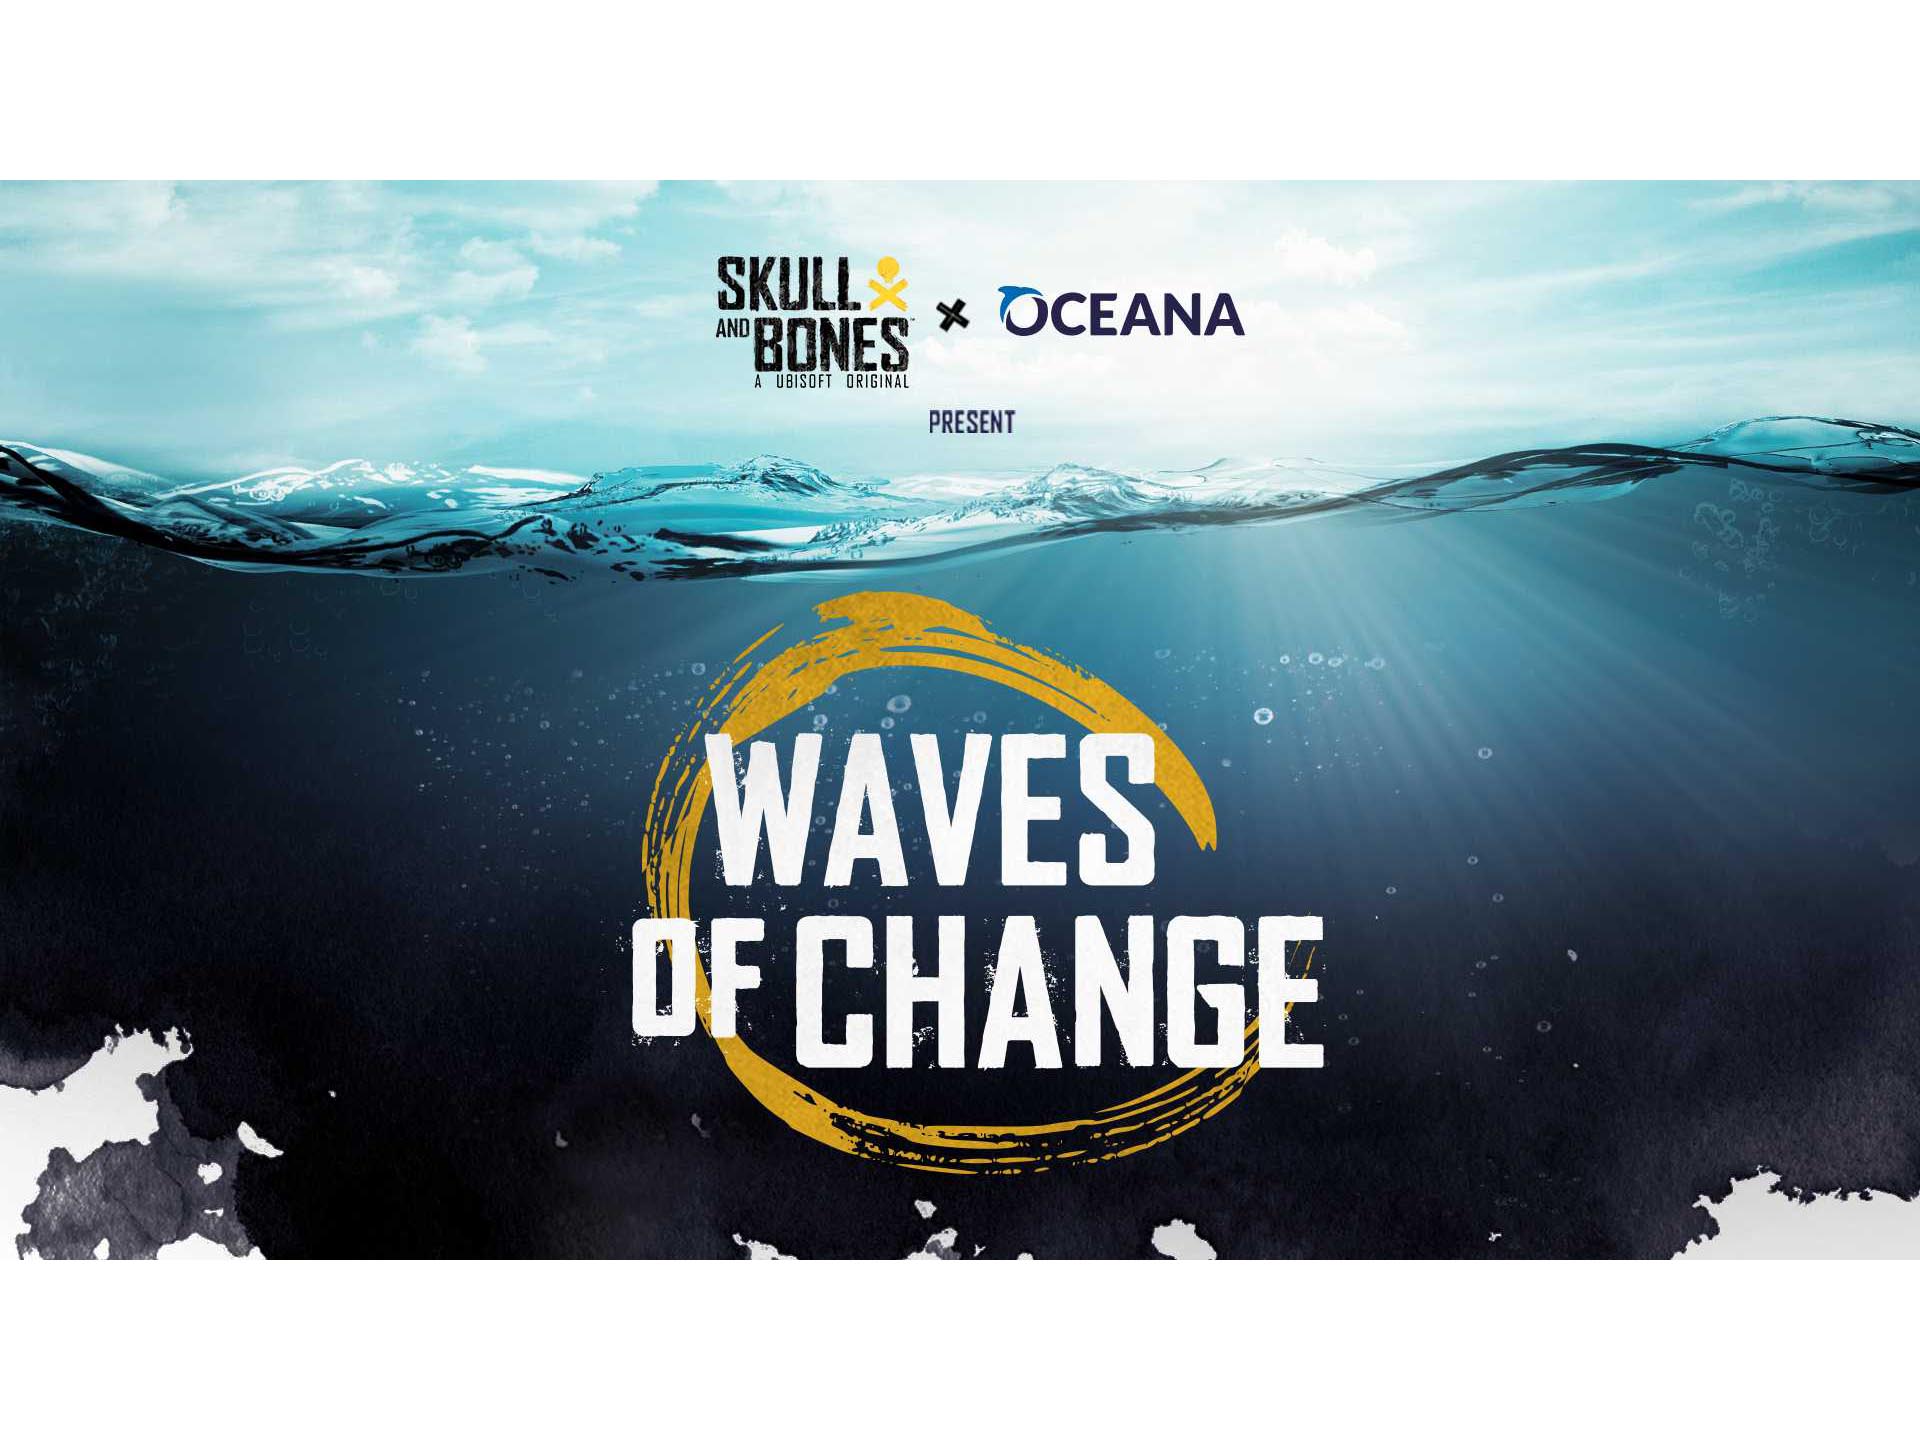 Biborg and Ubisoft present ‘Waves of Change' in-game charitable initiative